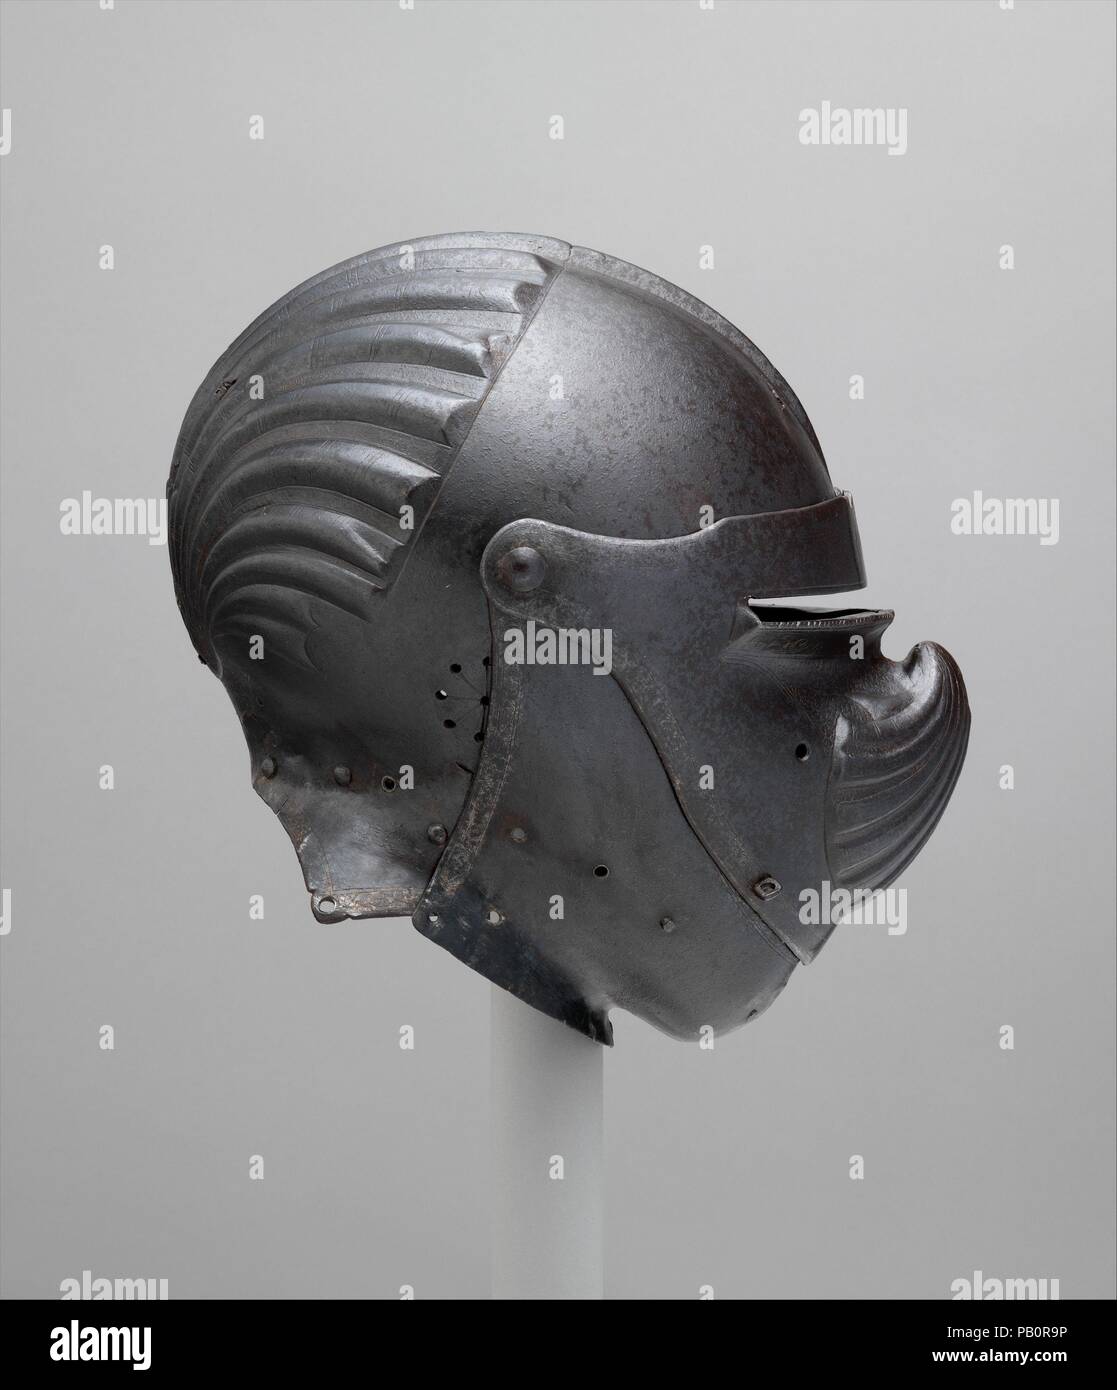 Close Helmet. Armorer: Gian Giacomo Negroli (Italian, Milan 1463-1543). Culture: Italian, Milan. Dimensions: H. 13 1/8 in. (33.3 cm); W. 8 1/2 in. (21.6 cm); D. 12 in. (30.5 cm); Wt. 3 lb. 6 oz. (1530 g). Date: ca. 1510-20.  As the only known work that may be ascribed with reasonable certainty to Gian Giacomo Negroli (1463-1543), this previously unrecorded helmet is a major addition to the small corpus of works marked or signed by members of the celebrated Negroli family of fifteenth- and sixteenth-century Milanese armorers--no more than twenty pieces in total--of which key examples are in the Stock Photo